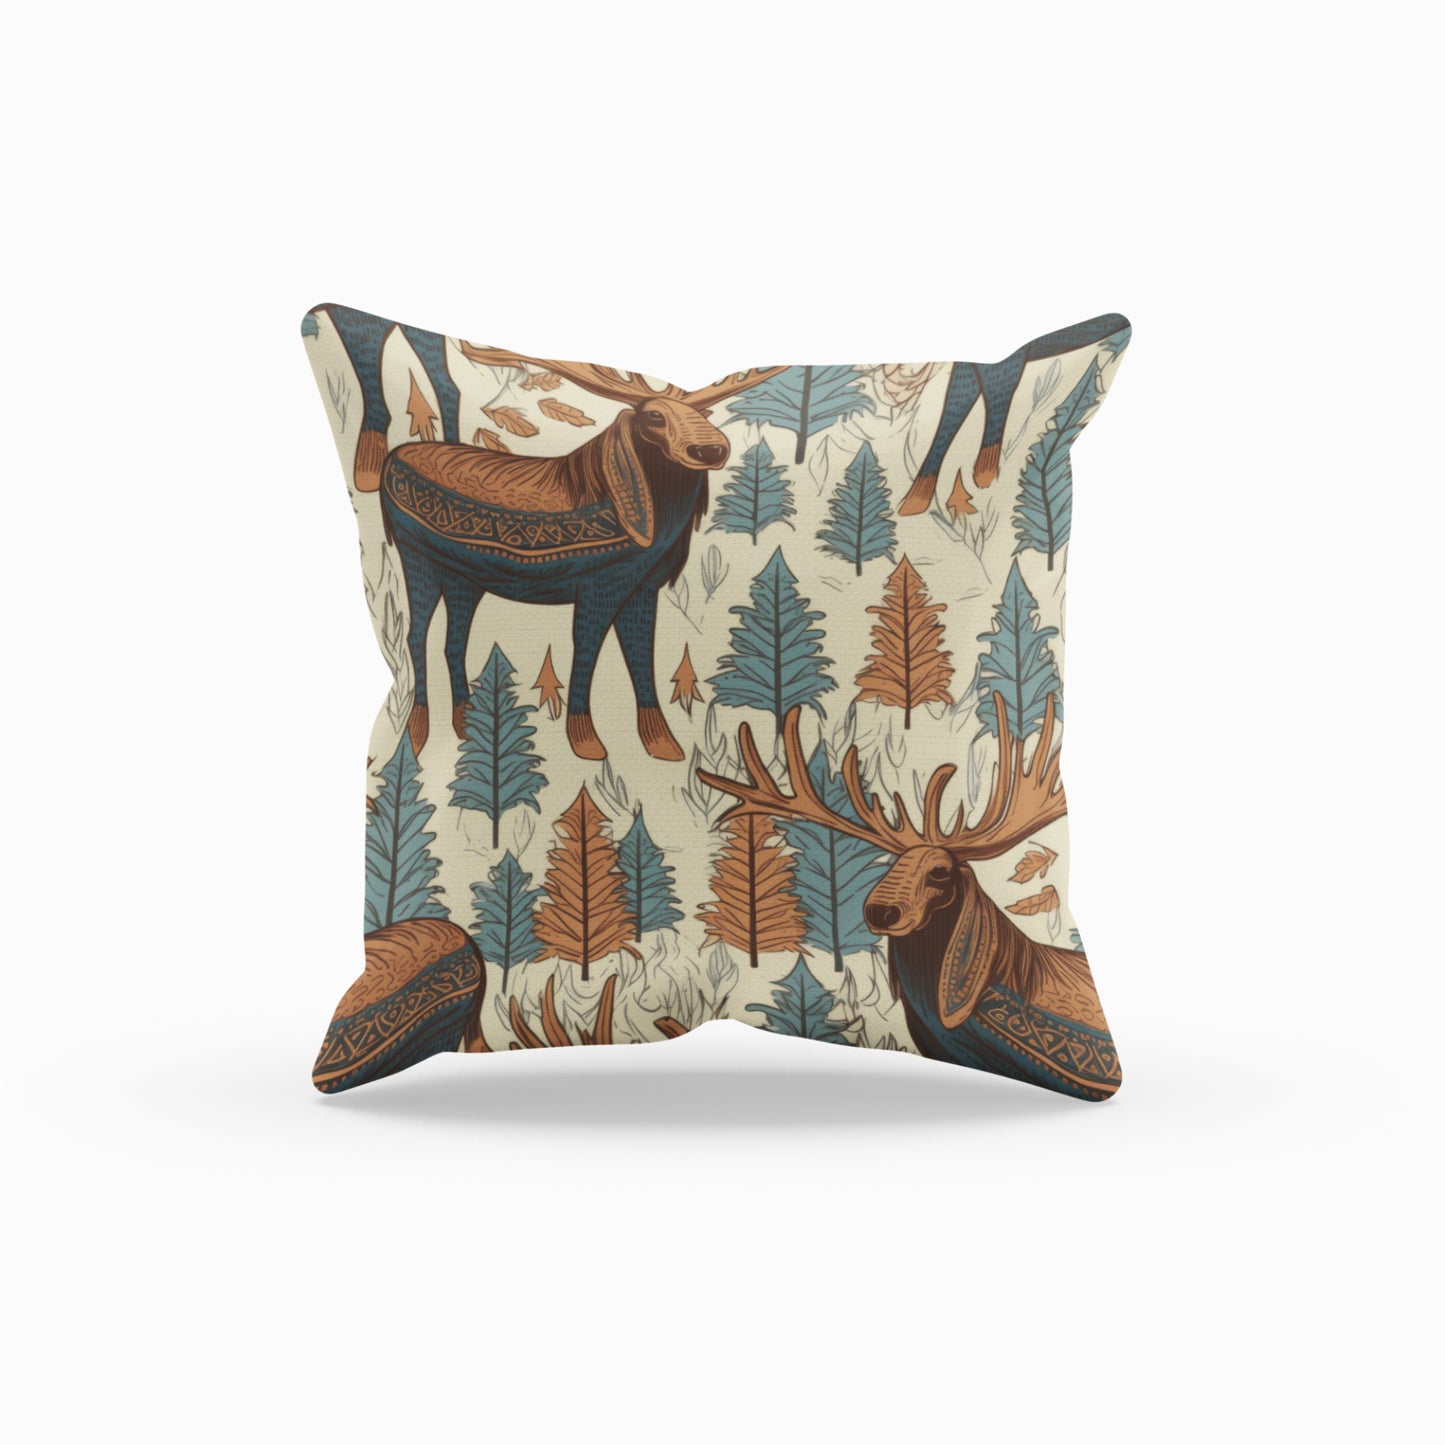 Deer Pattern Fall Home Decor Throw Pillow by Homeezone